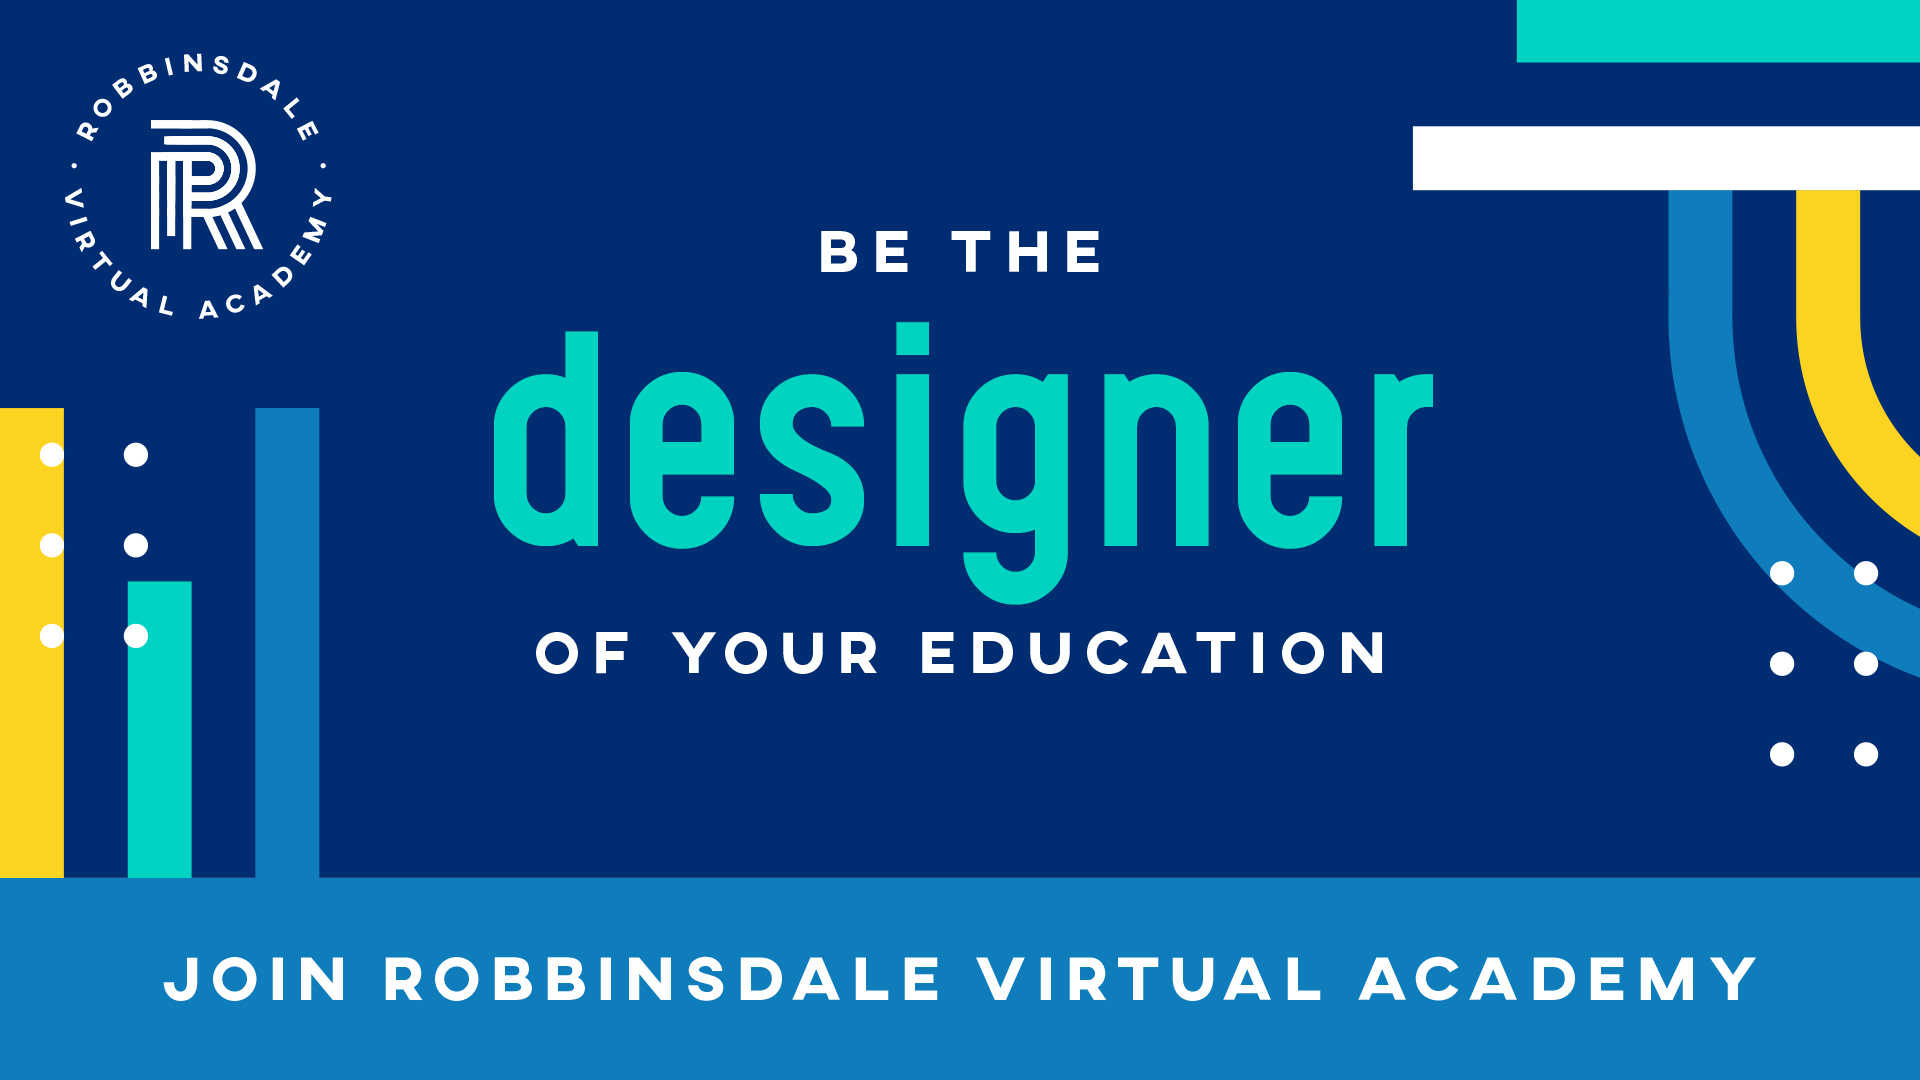 be the design author creator inventor architect of your educate join robbinsdale virtual academy